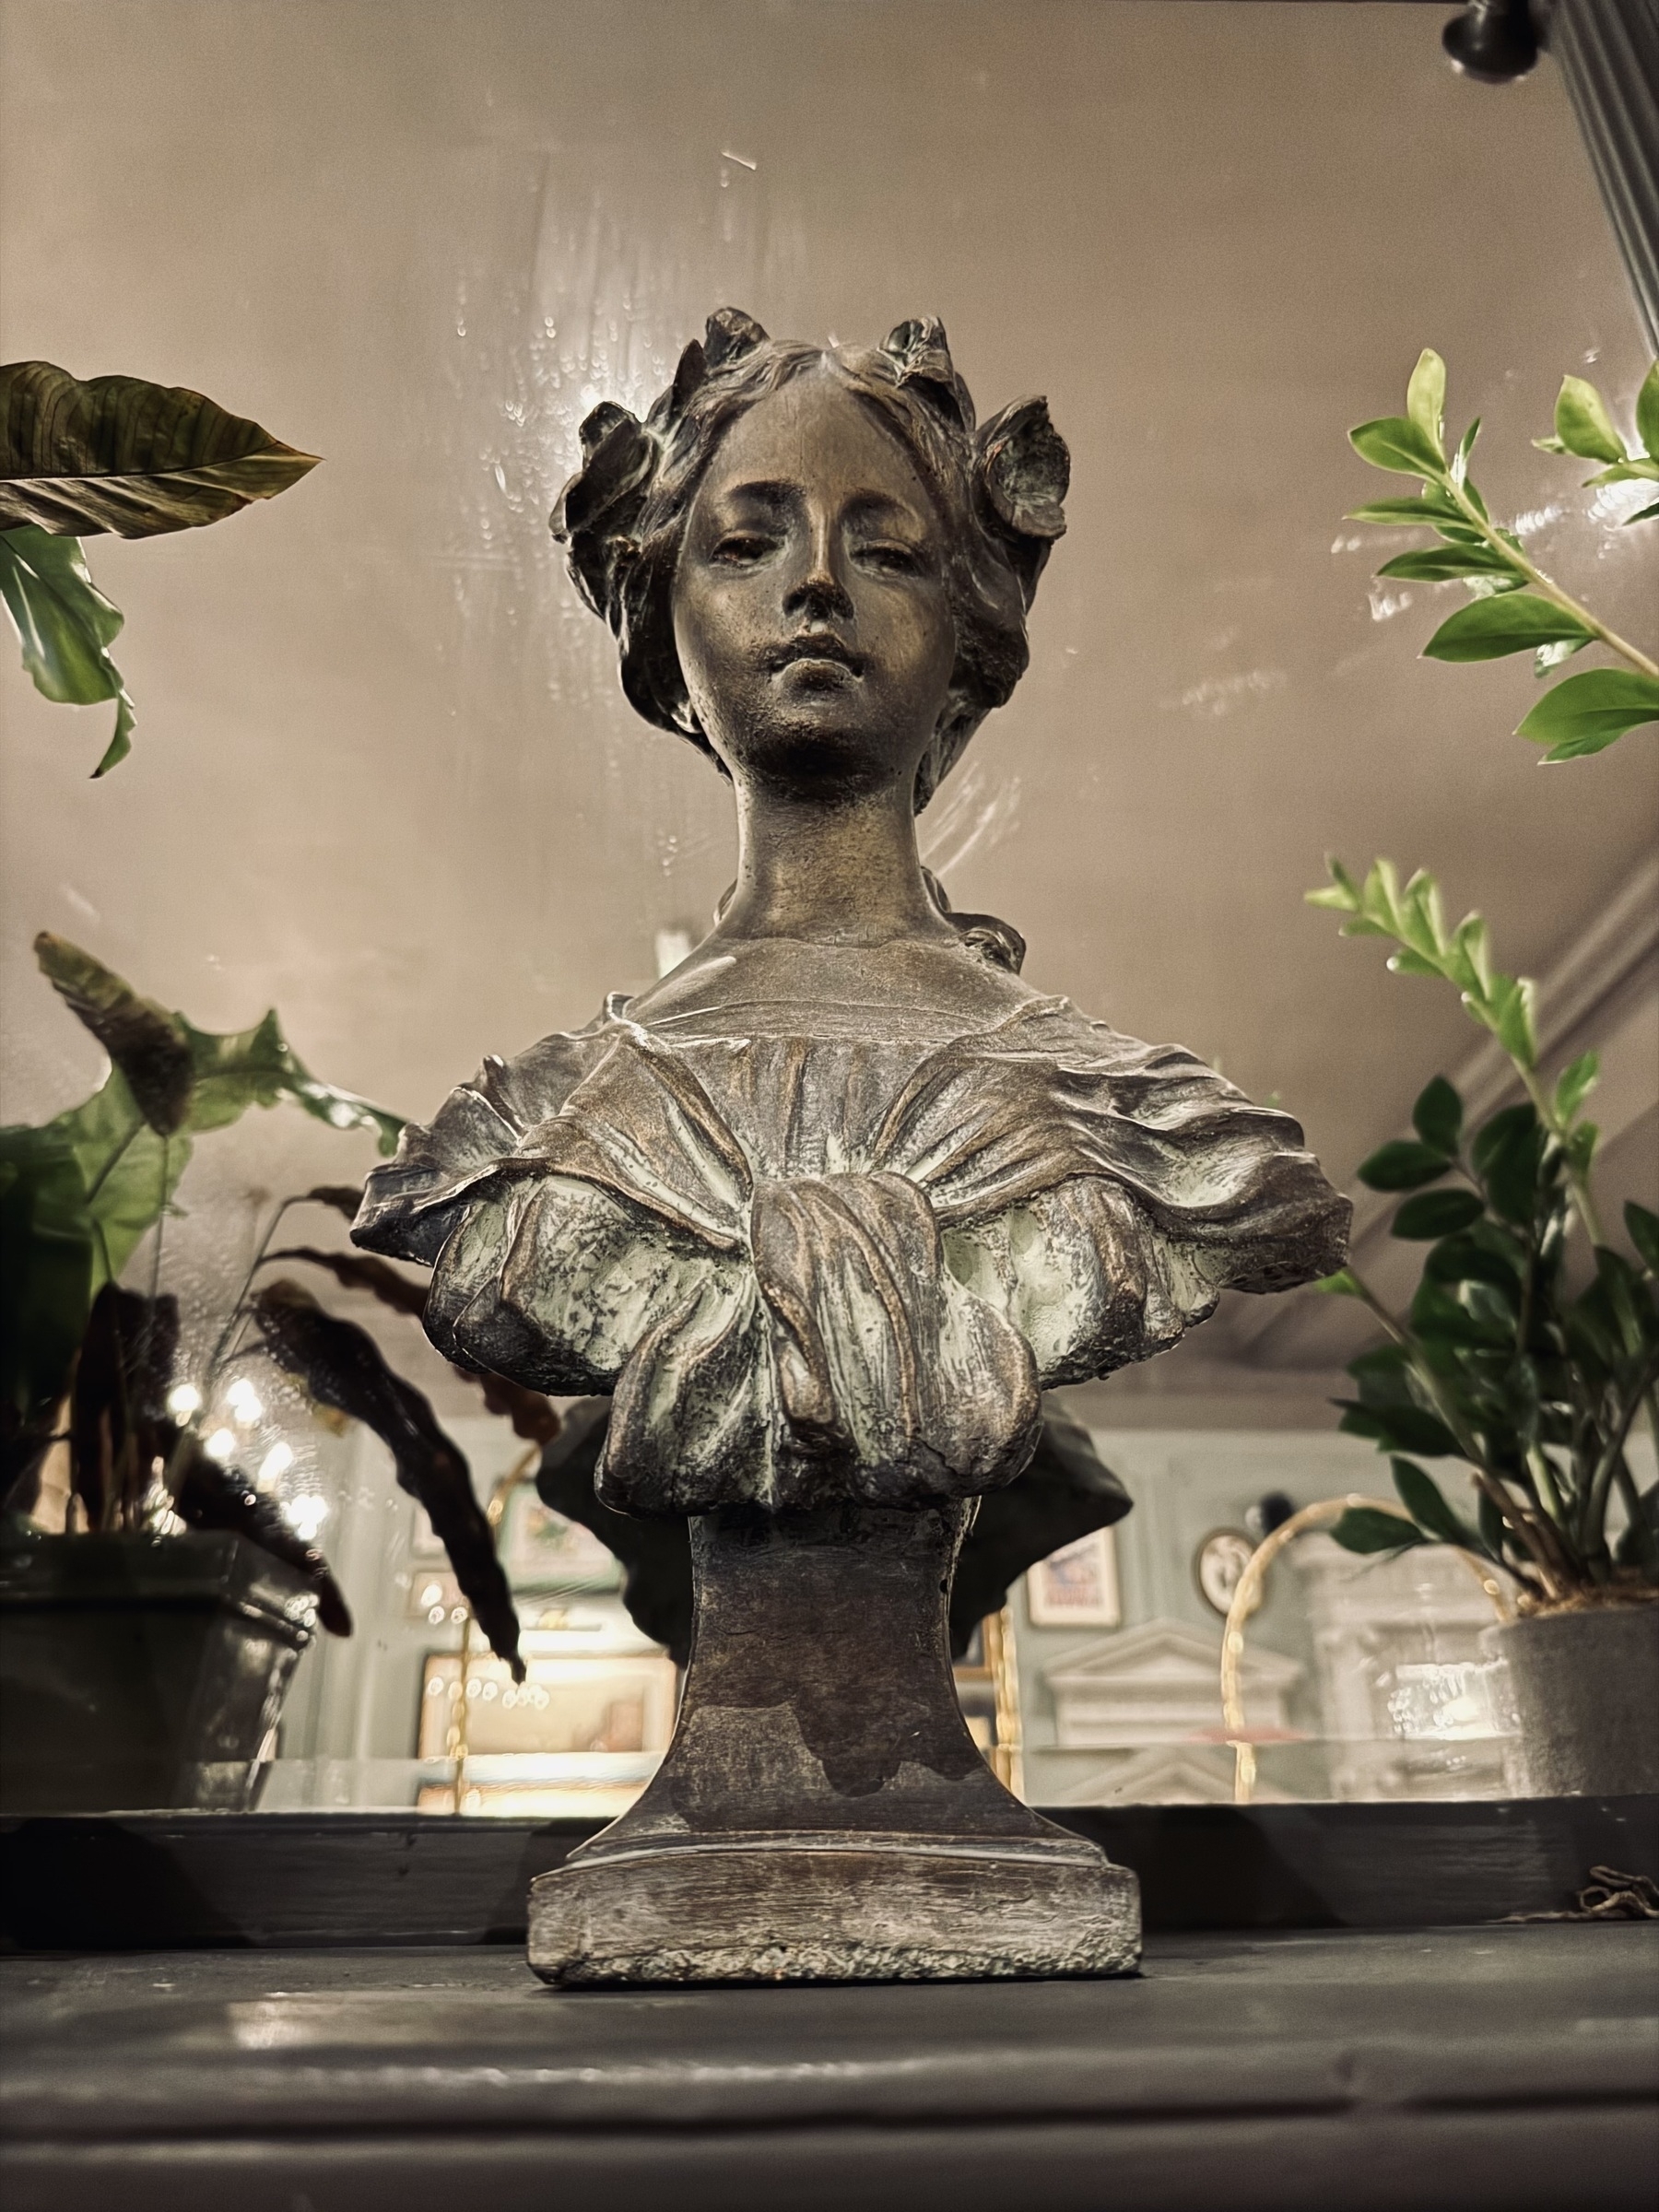 A bust sitting on a mantelpiece in front of a mirror. It’s surrounded by plants and looking down at the camera.